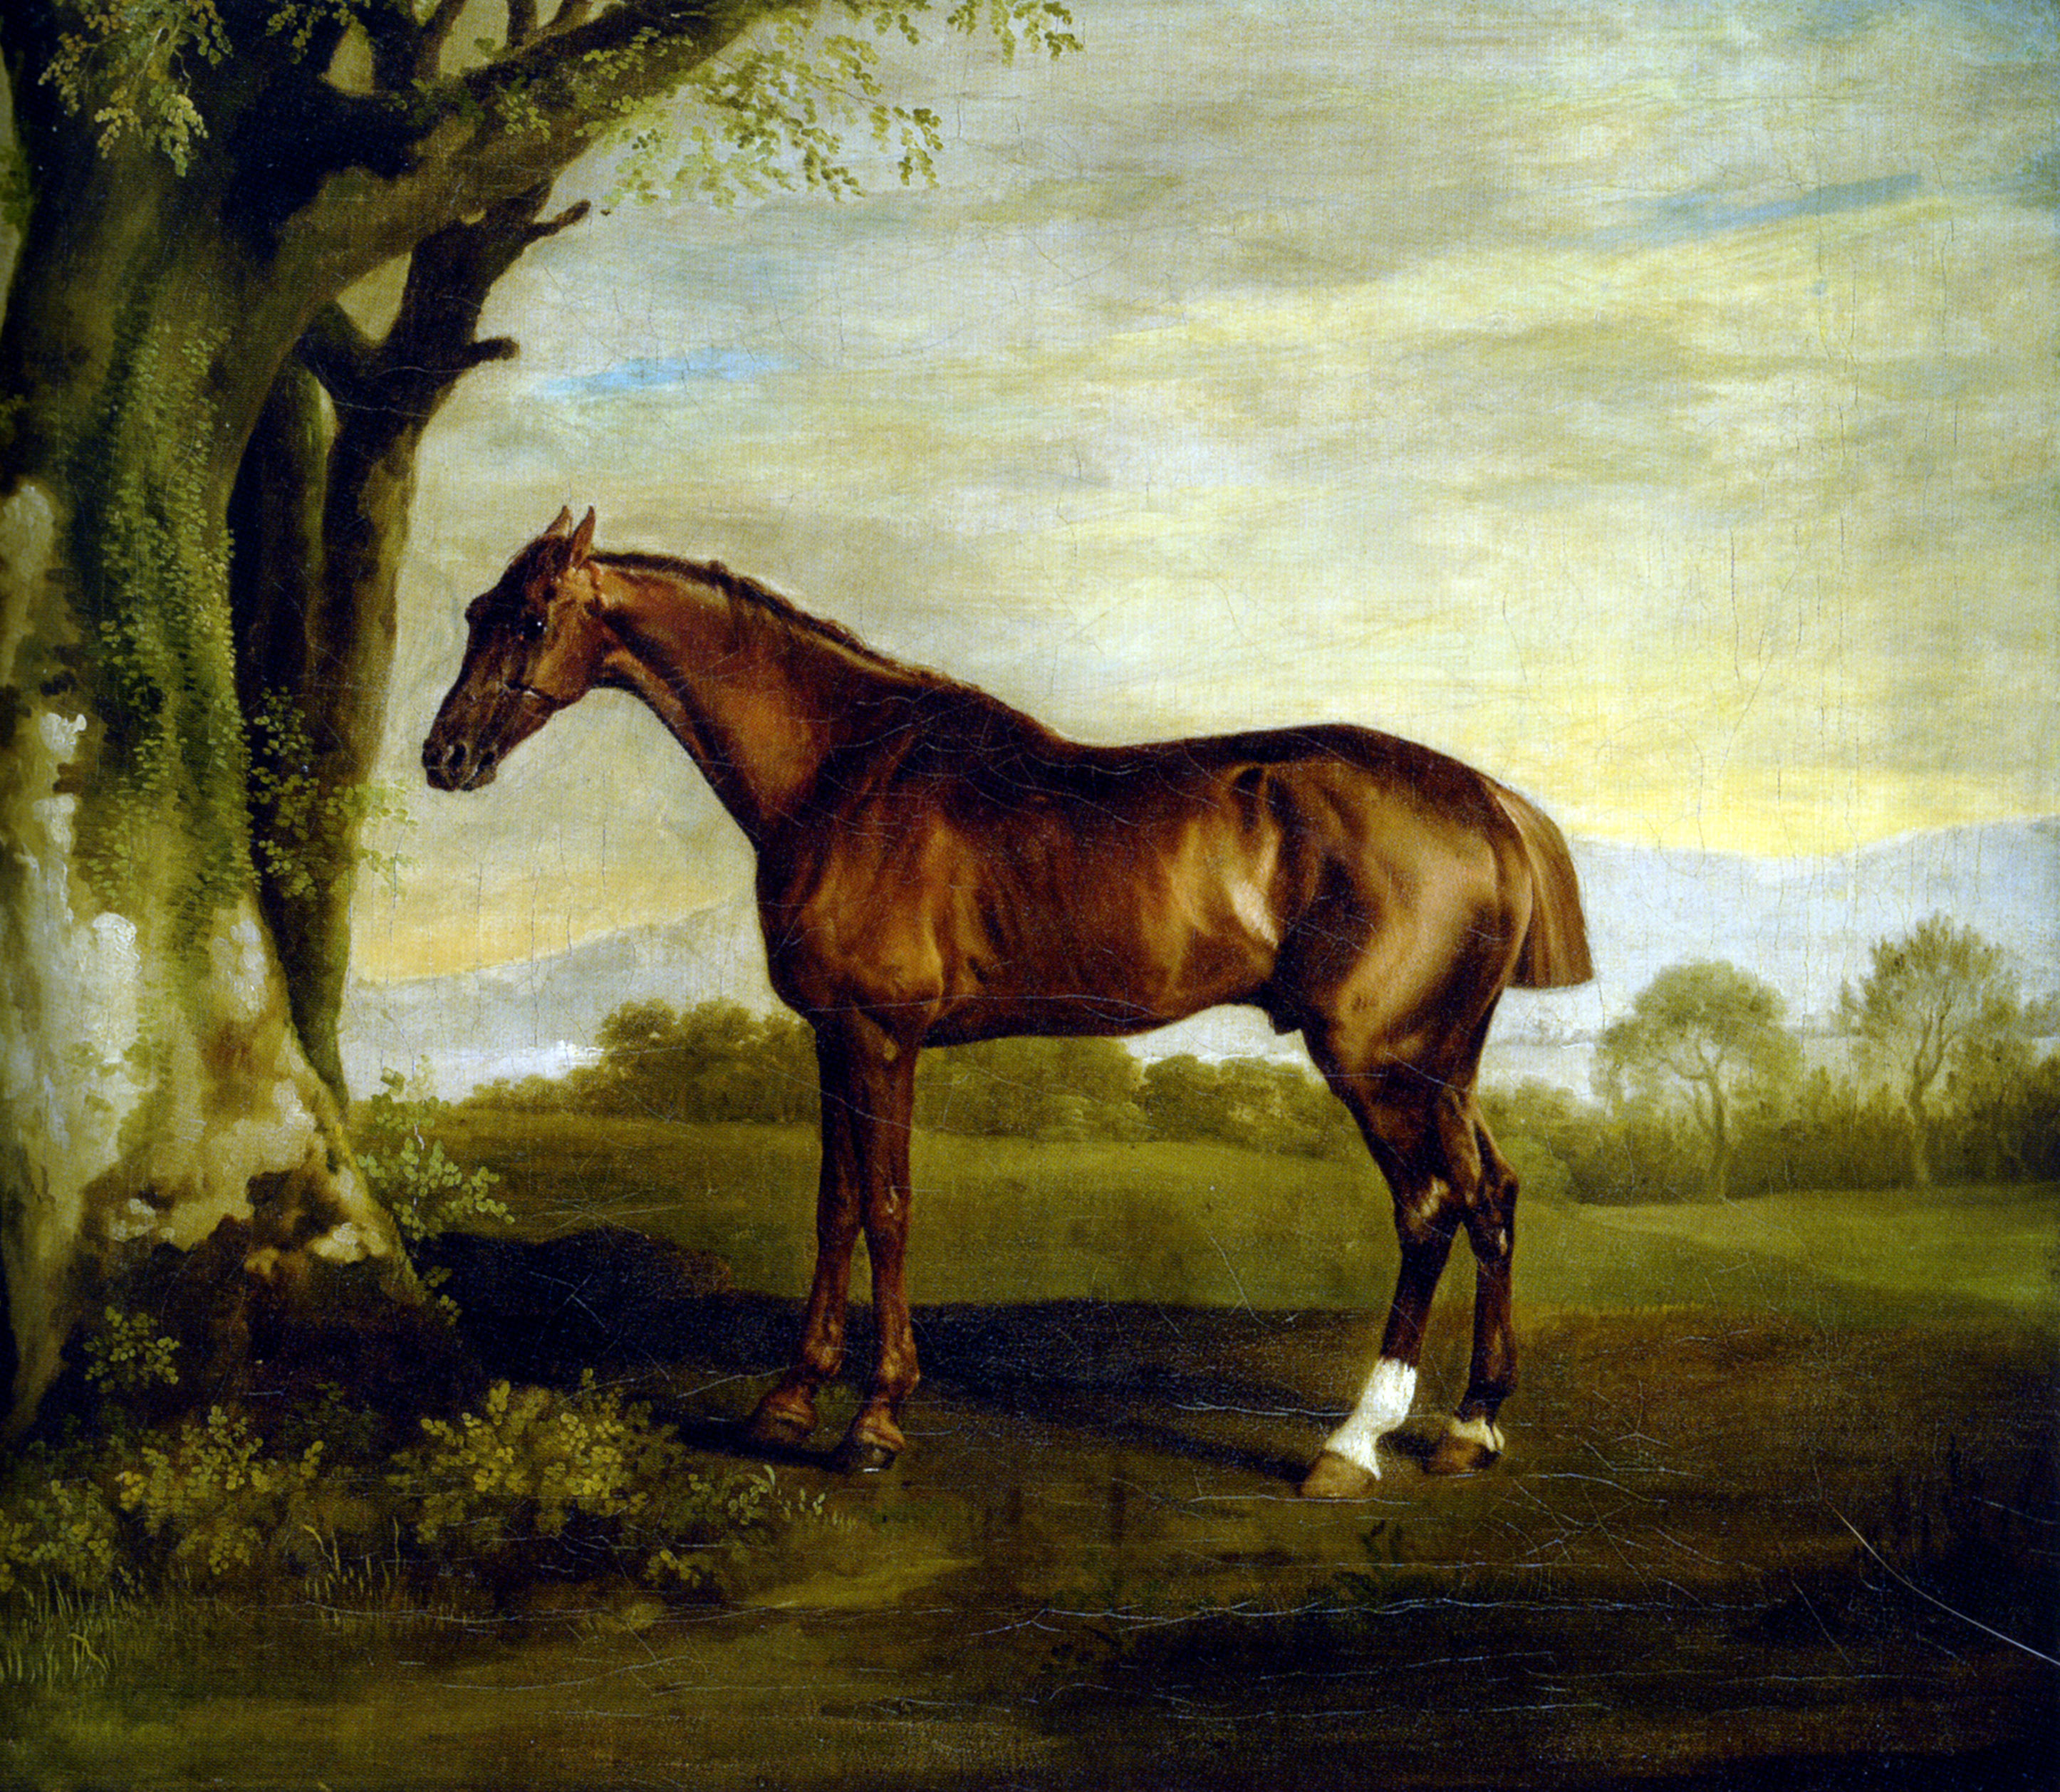 A Chestnut Racehorse by George Stubbs